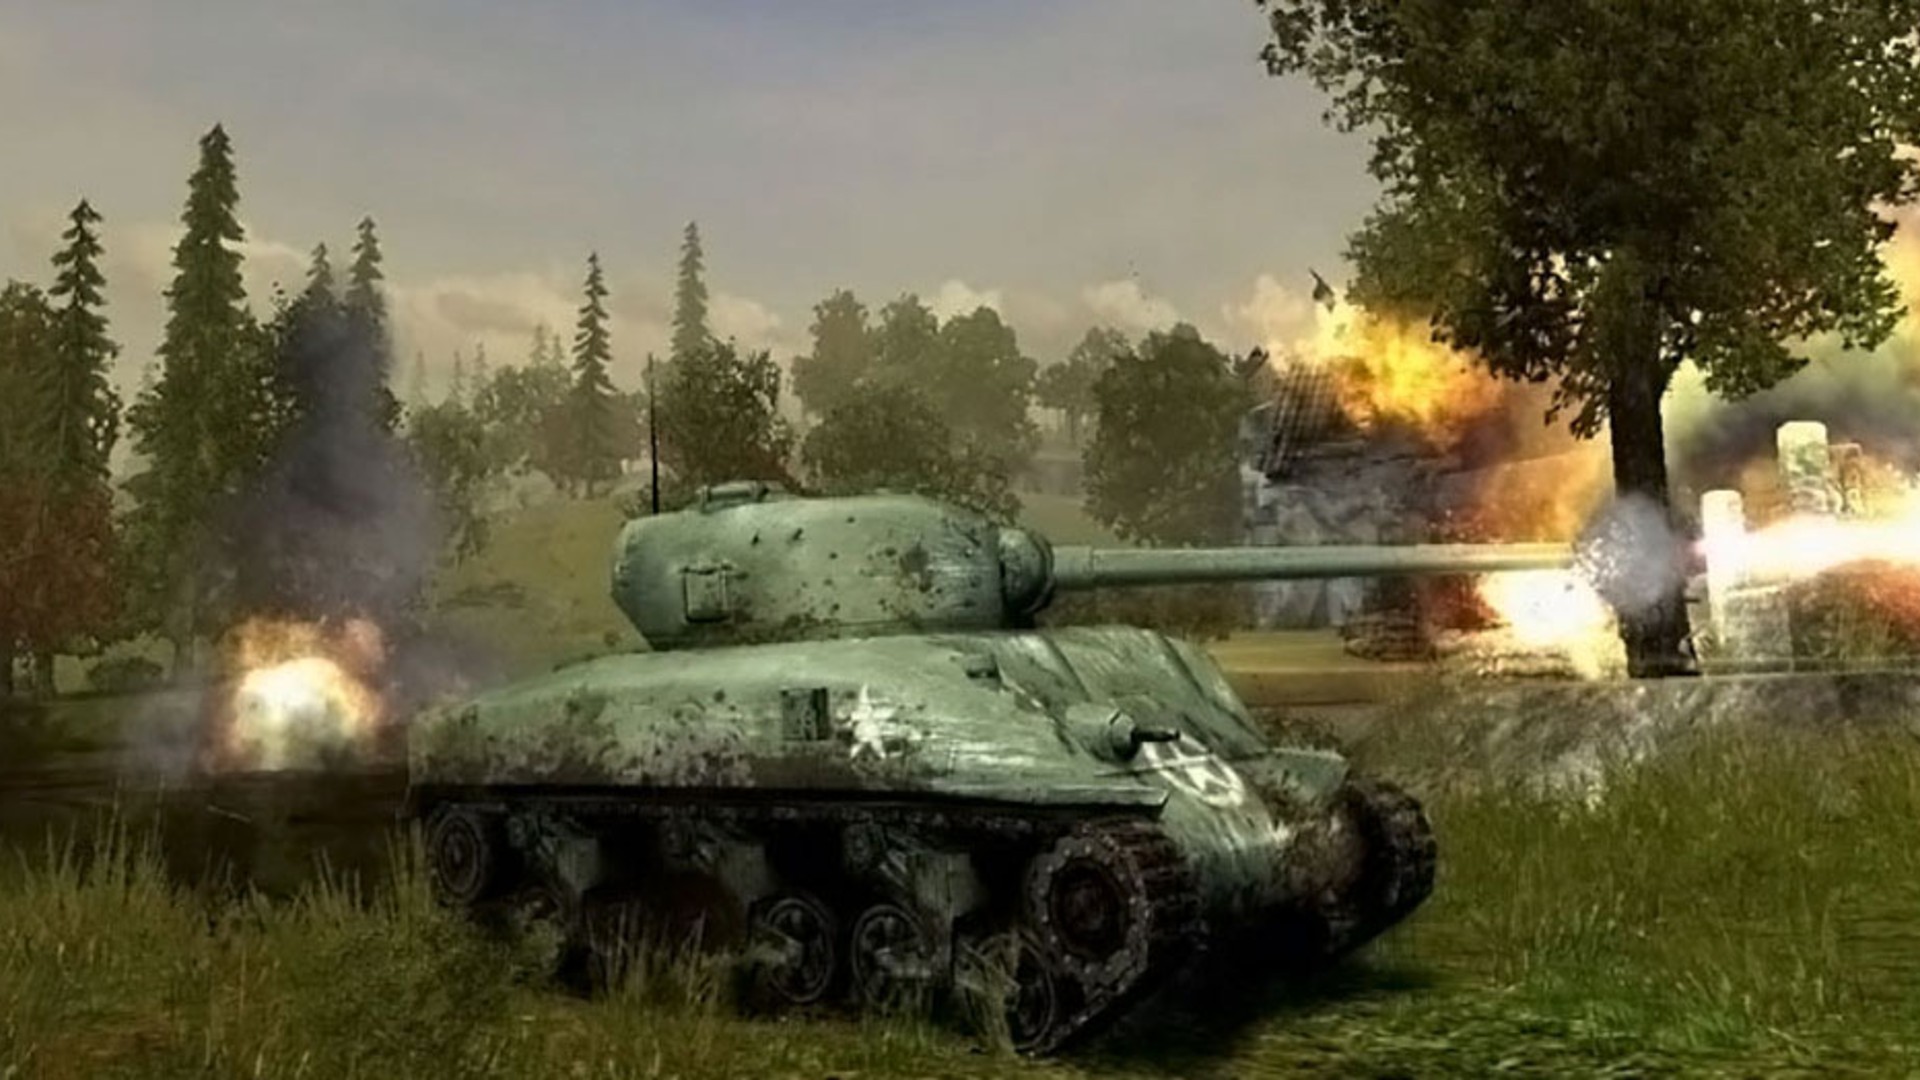 Best tank games: Panzer Elite Action. Image shows a tank in action in the countryside.